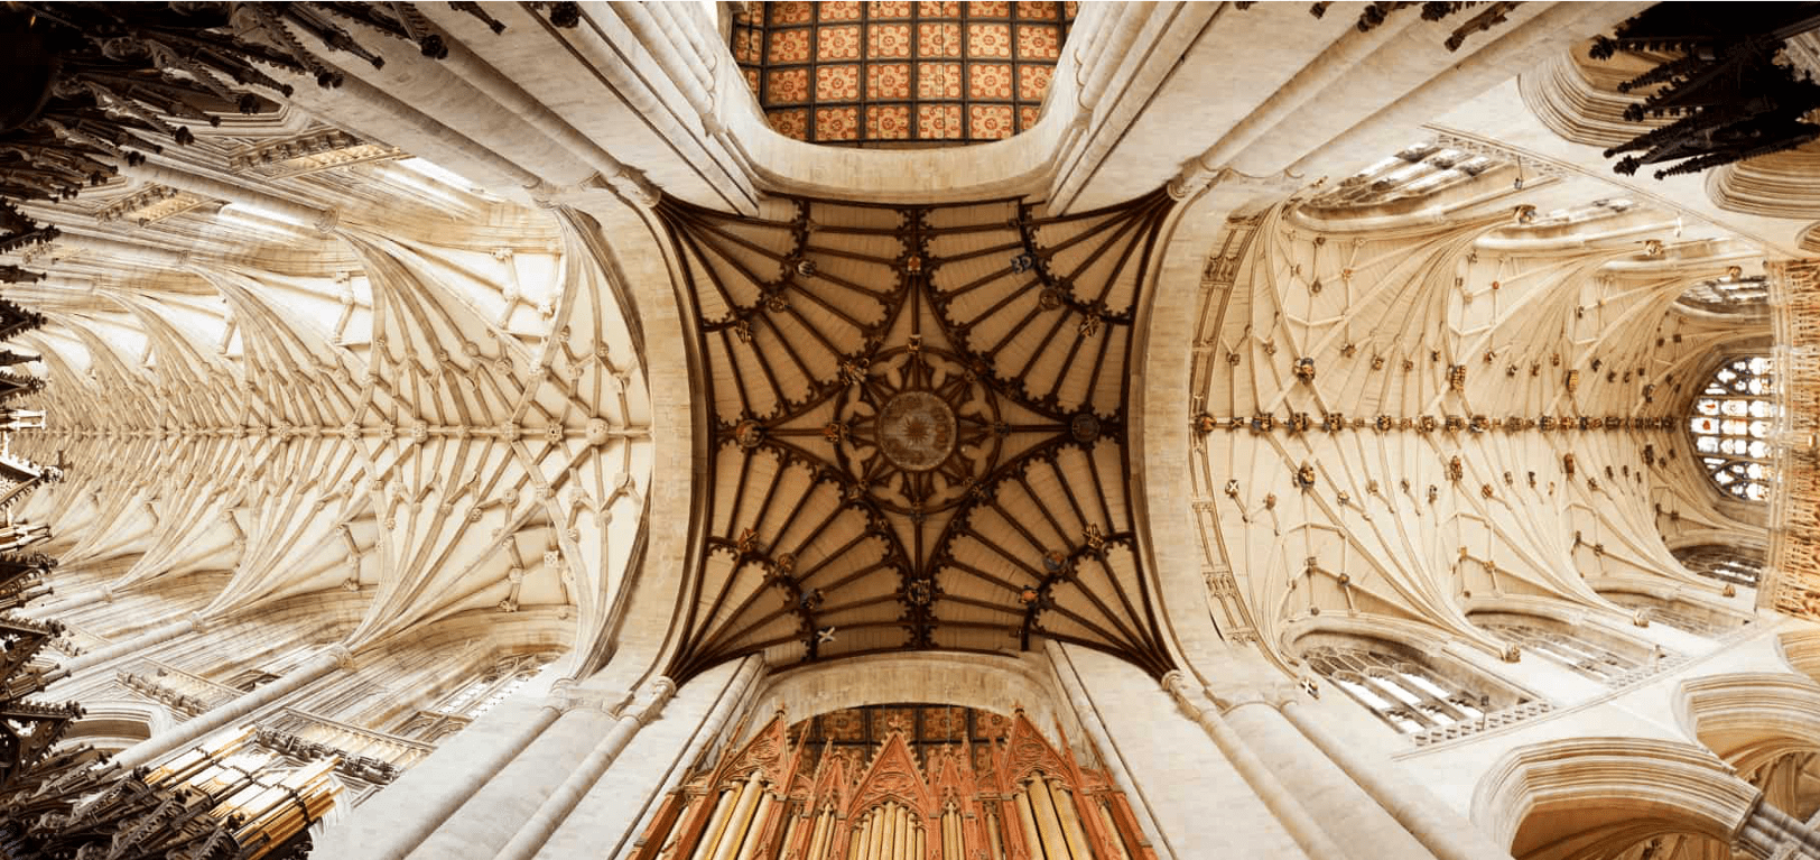 Ring Out for Climate - The Association of English Cathedrals